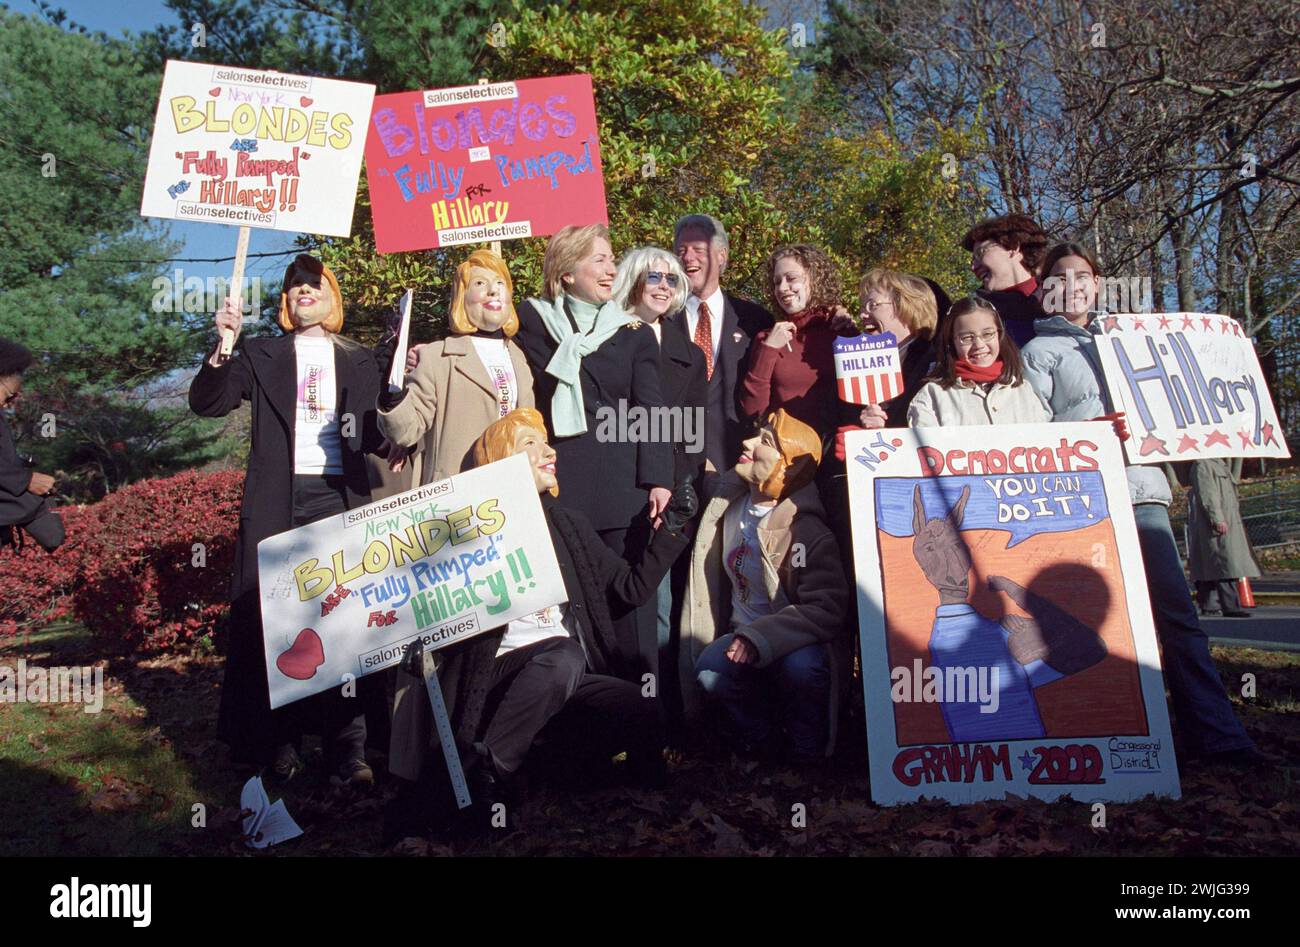 Hillary Rodham Clinton, William Jefferson Clinton and Chelsea Clinton pose at a voting station where a group of women are holding signs and wearing Hillary masks, Chappaqua, New York, 11/7/2000. (Photo by David Scull/White House Photograph Office-Clinton Administration) Stock Photo